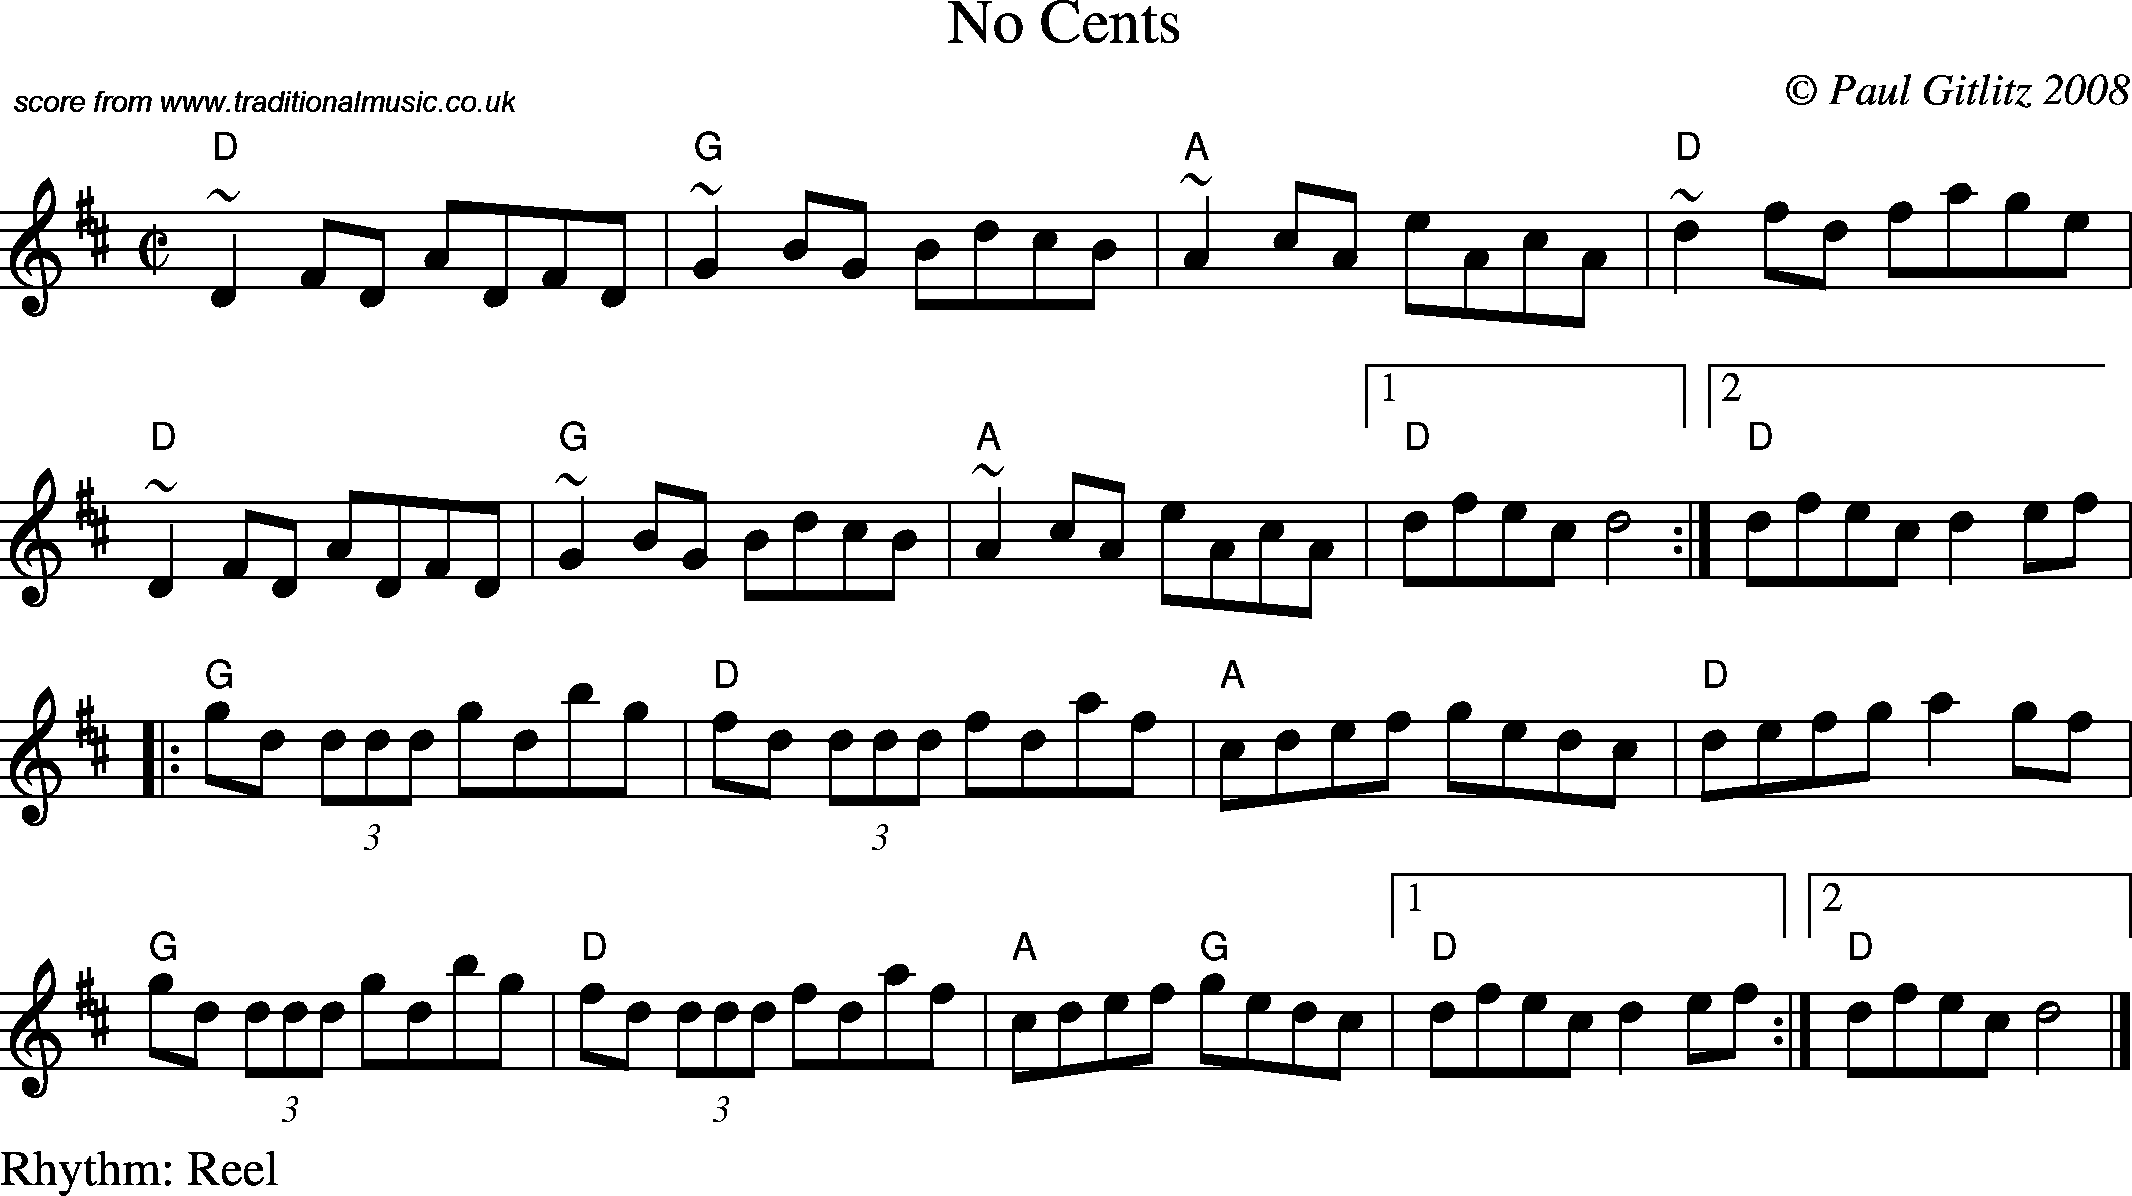 Sheet Music Score for Reel - No Cents